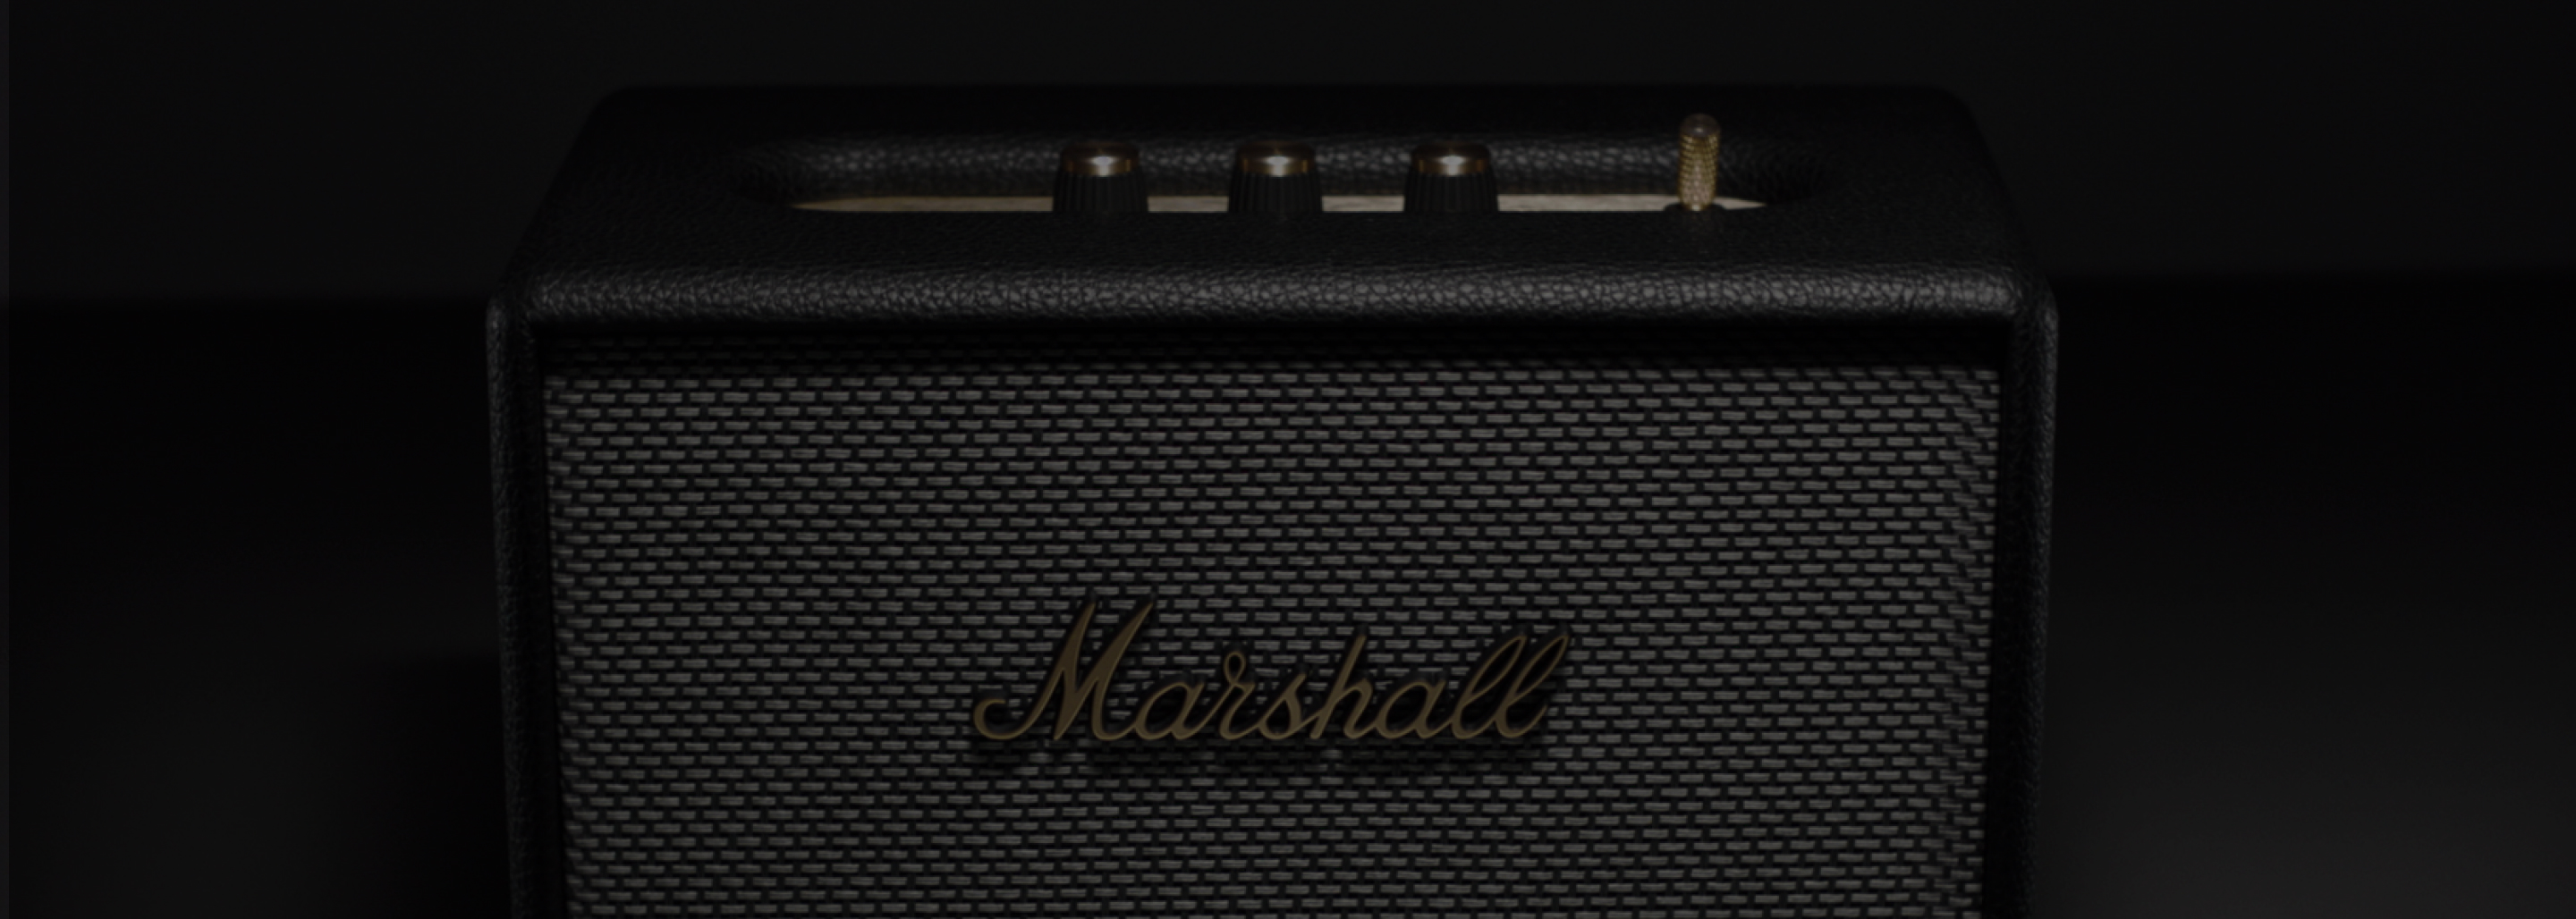 Marshall Acton III review: a small but mighty home speaker